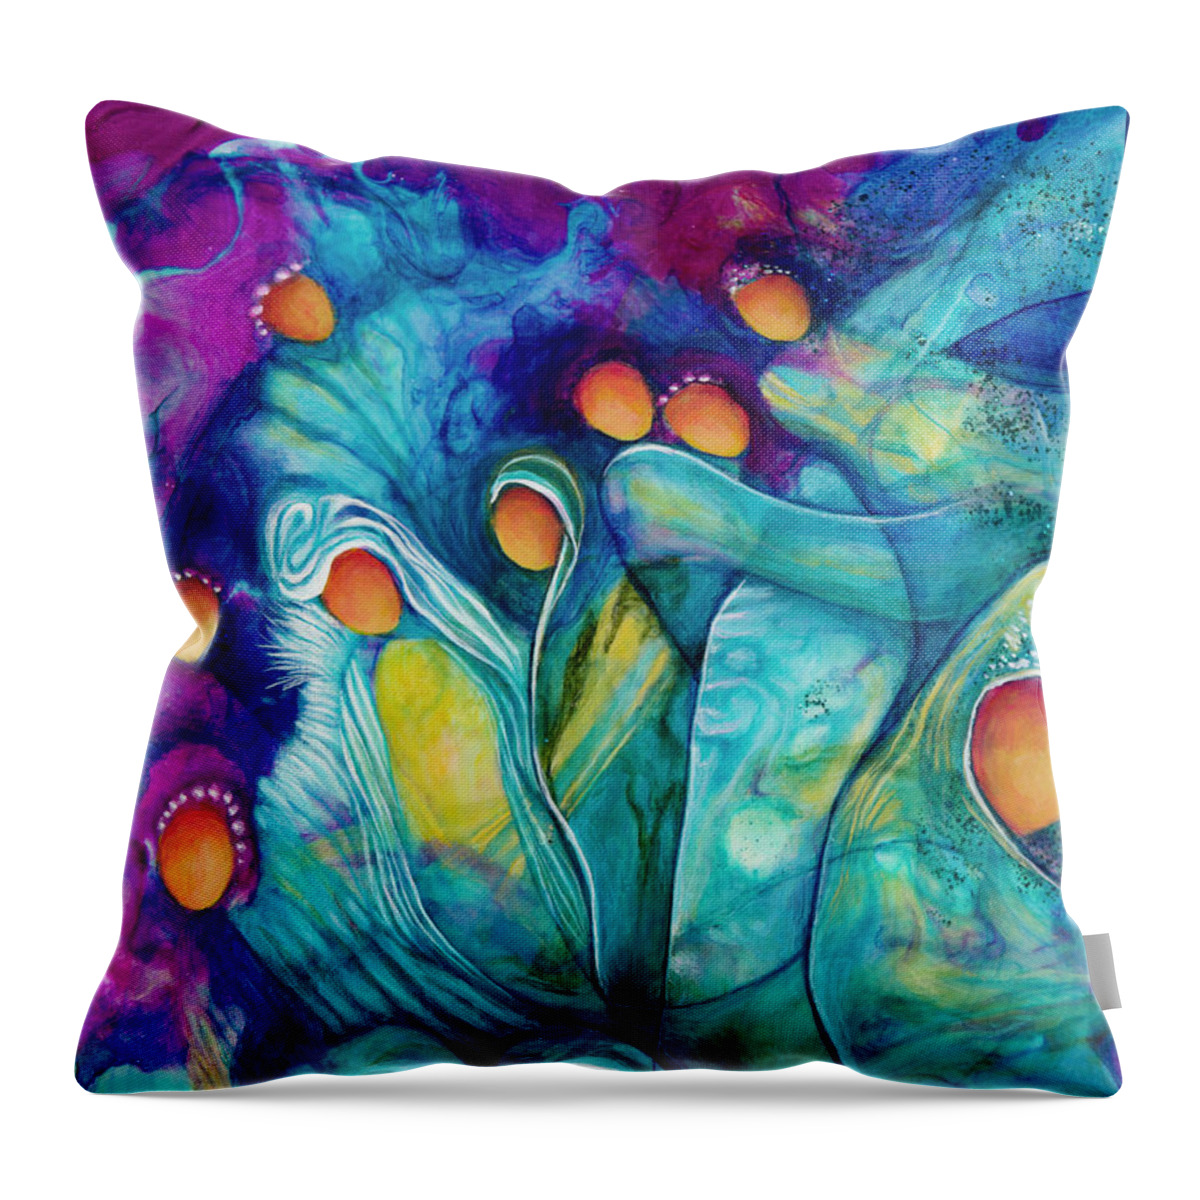 Unity Art Throw Pillow featuring the painting Stardust by Darcy Lee Saxton